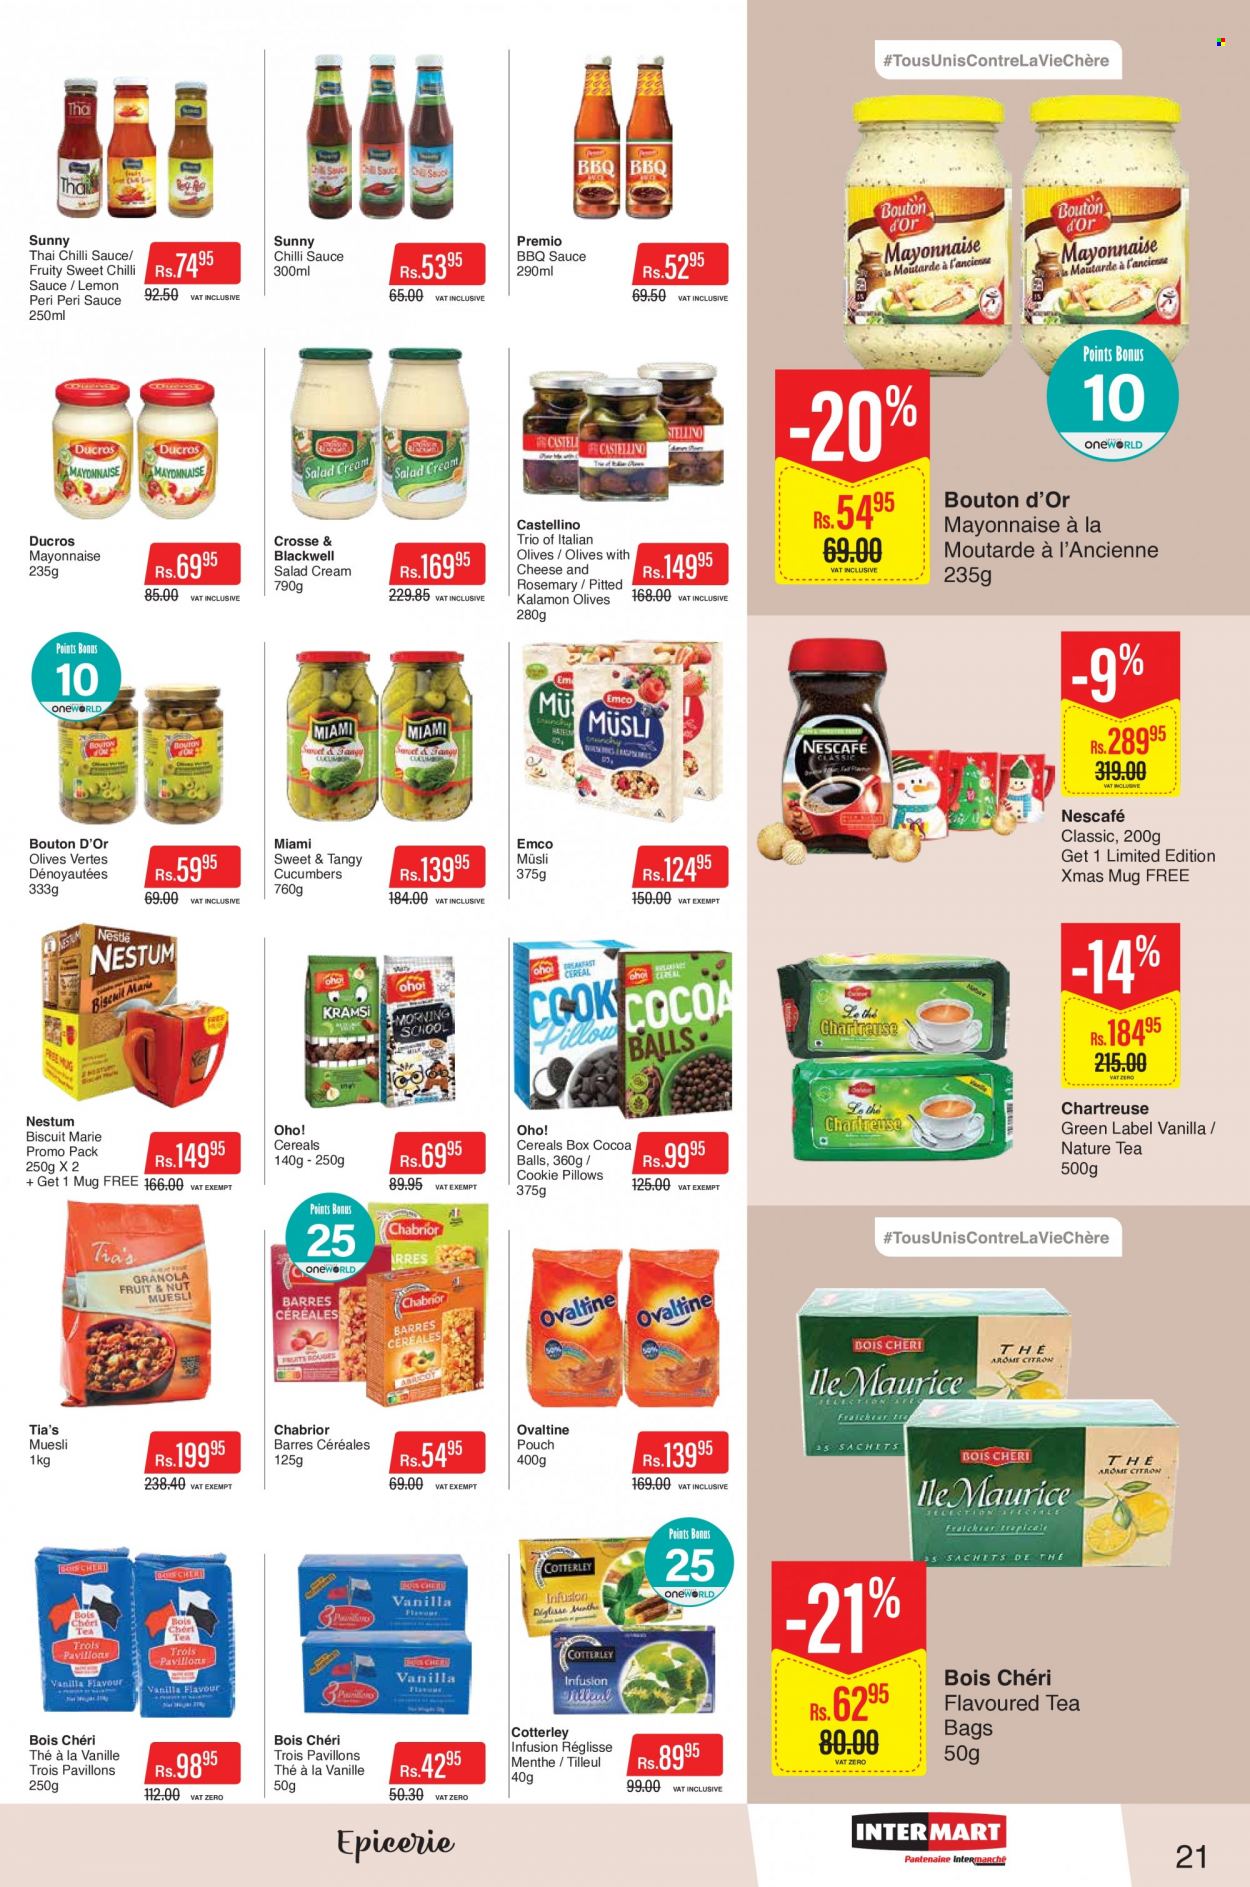 thumbnail - Intermart Catalogue - 23.11.2022 - 20.12.2022 - Sales products - cucumber, cheese, mayonnaise, salad cream, biscuit, cocoa, cereals, muesli, rosemary, BBQ sauce, chilli sauce, sweet chilli sauce, peri peri sauce, tea bags, mug, olives, Nescafé. Page 21.